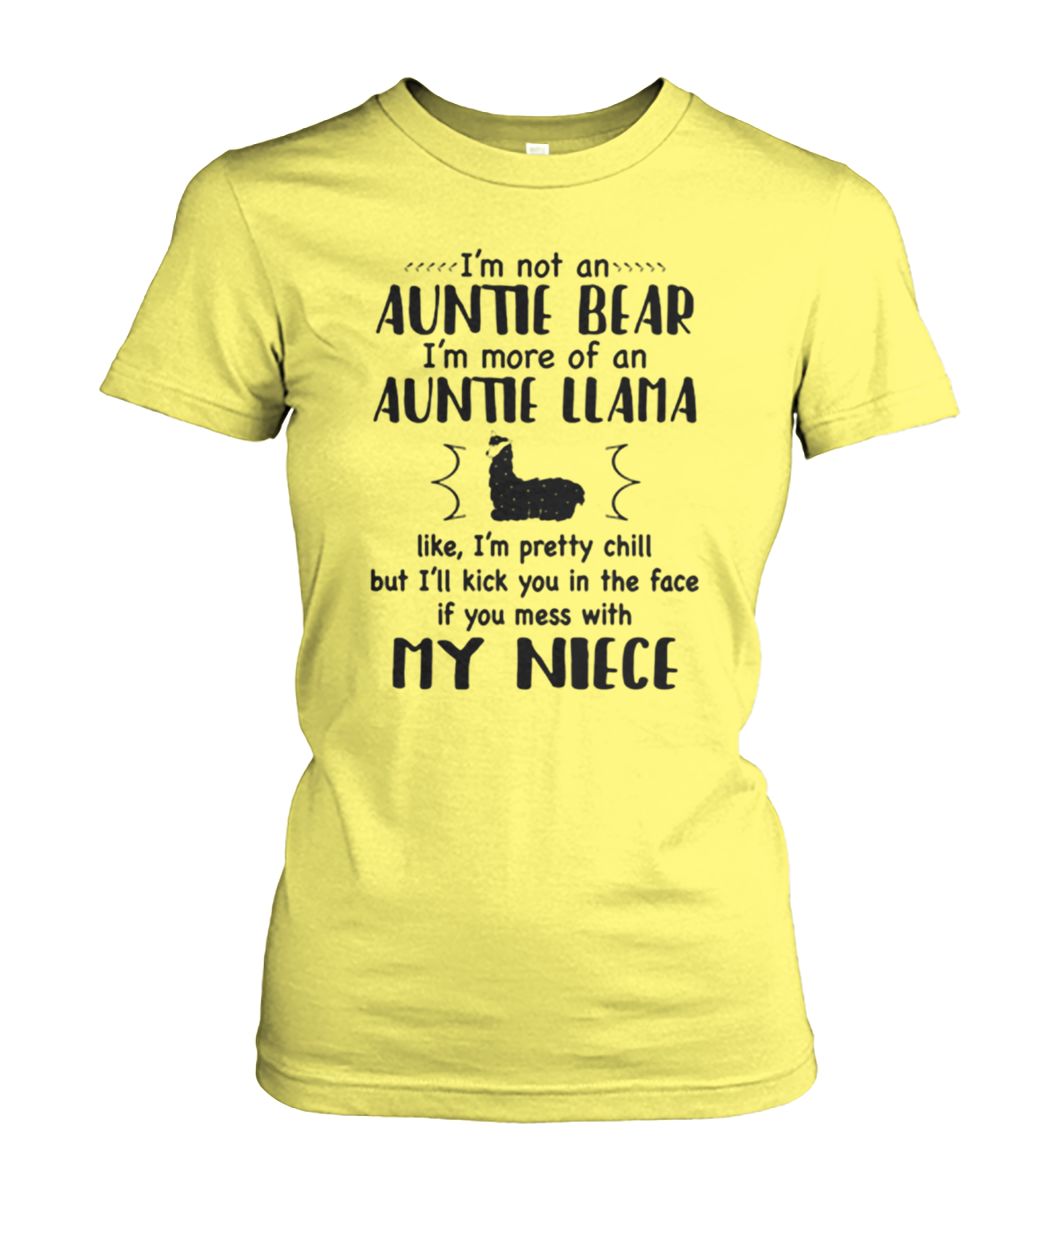 I'm not an auntie bear I'm more of an auntie llama women's crew tee